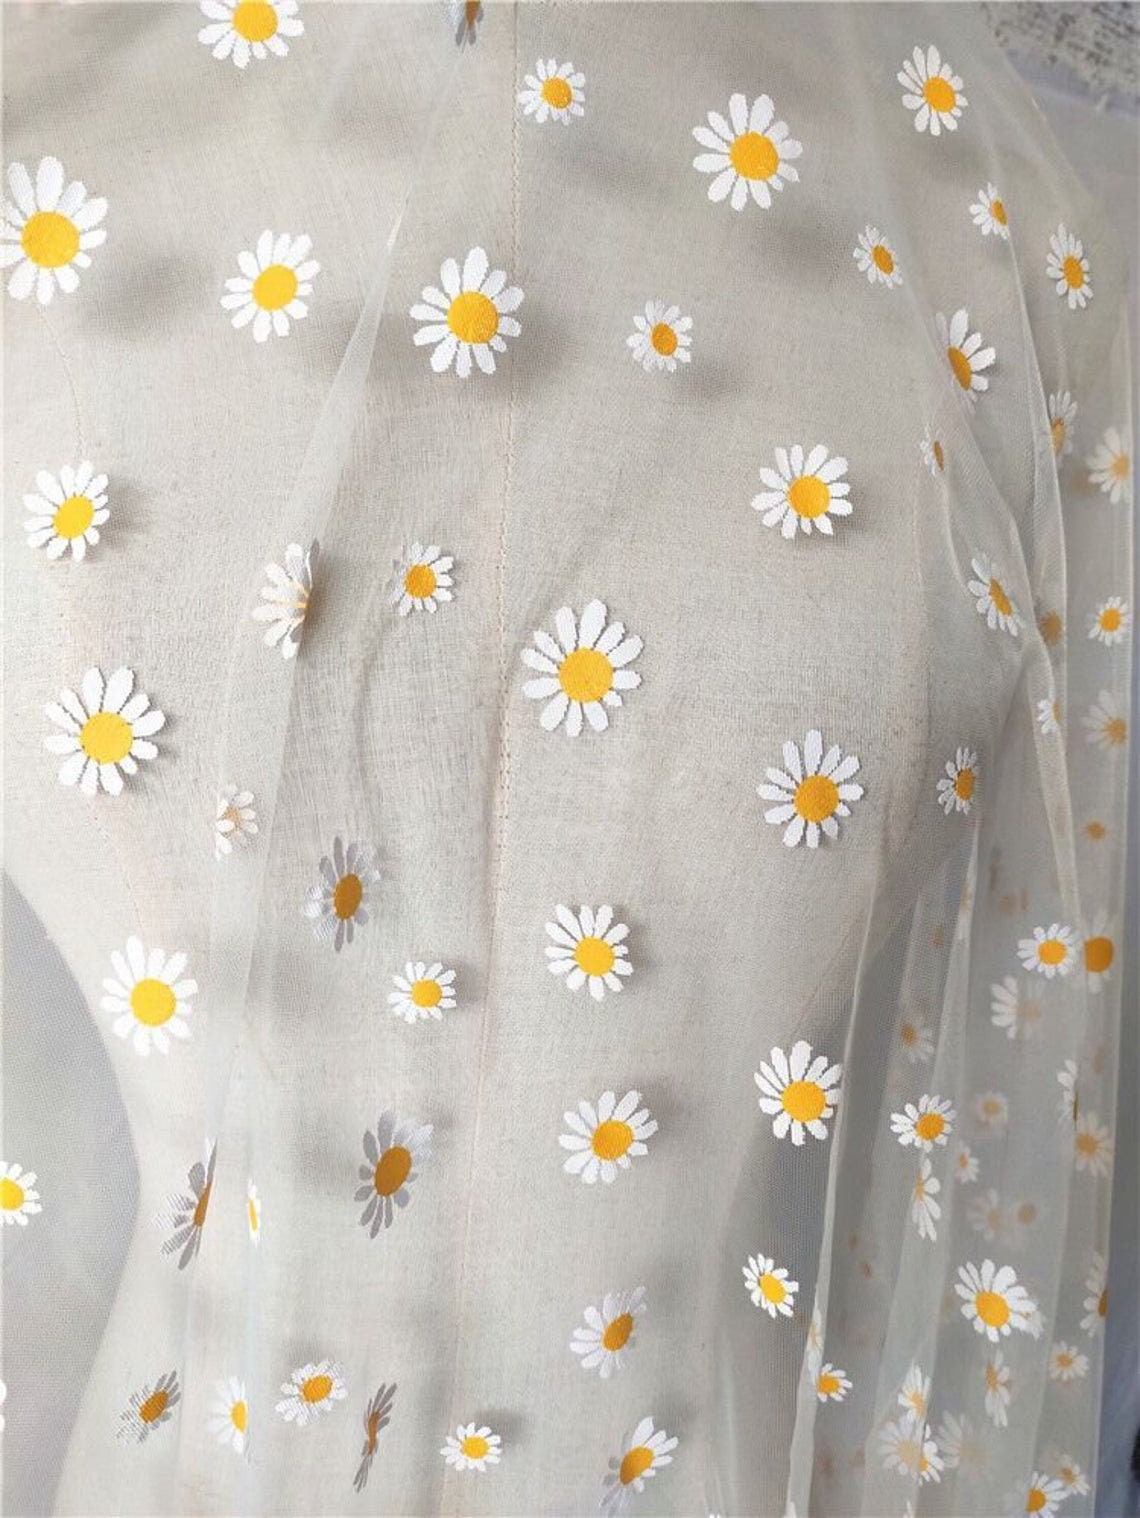 Buy White-yellow Daisy Print Lace Fabric Flower Daisy Tulle Fabric